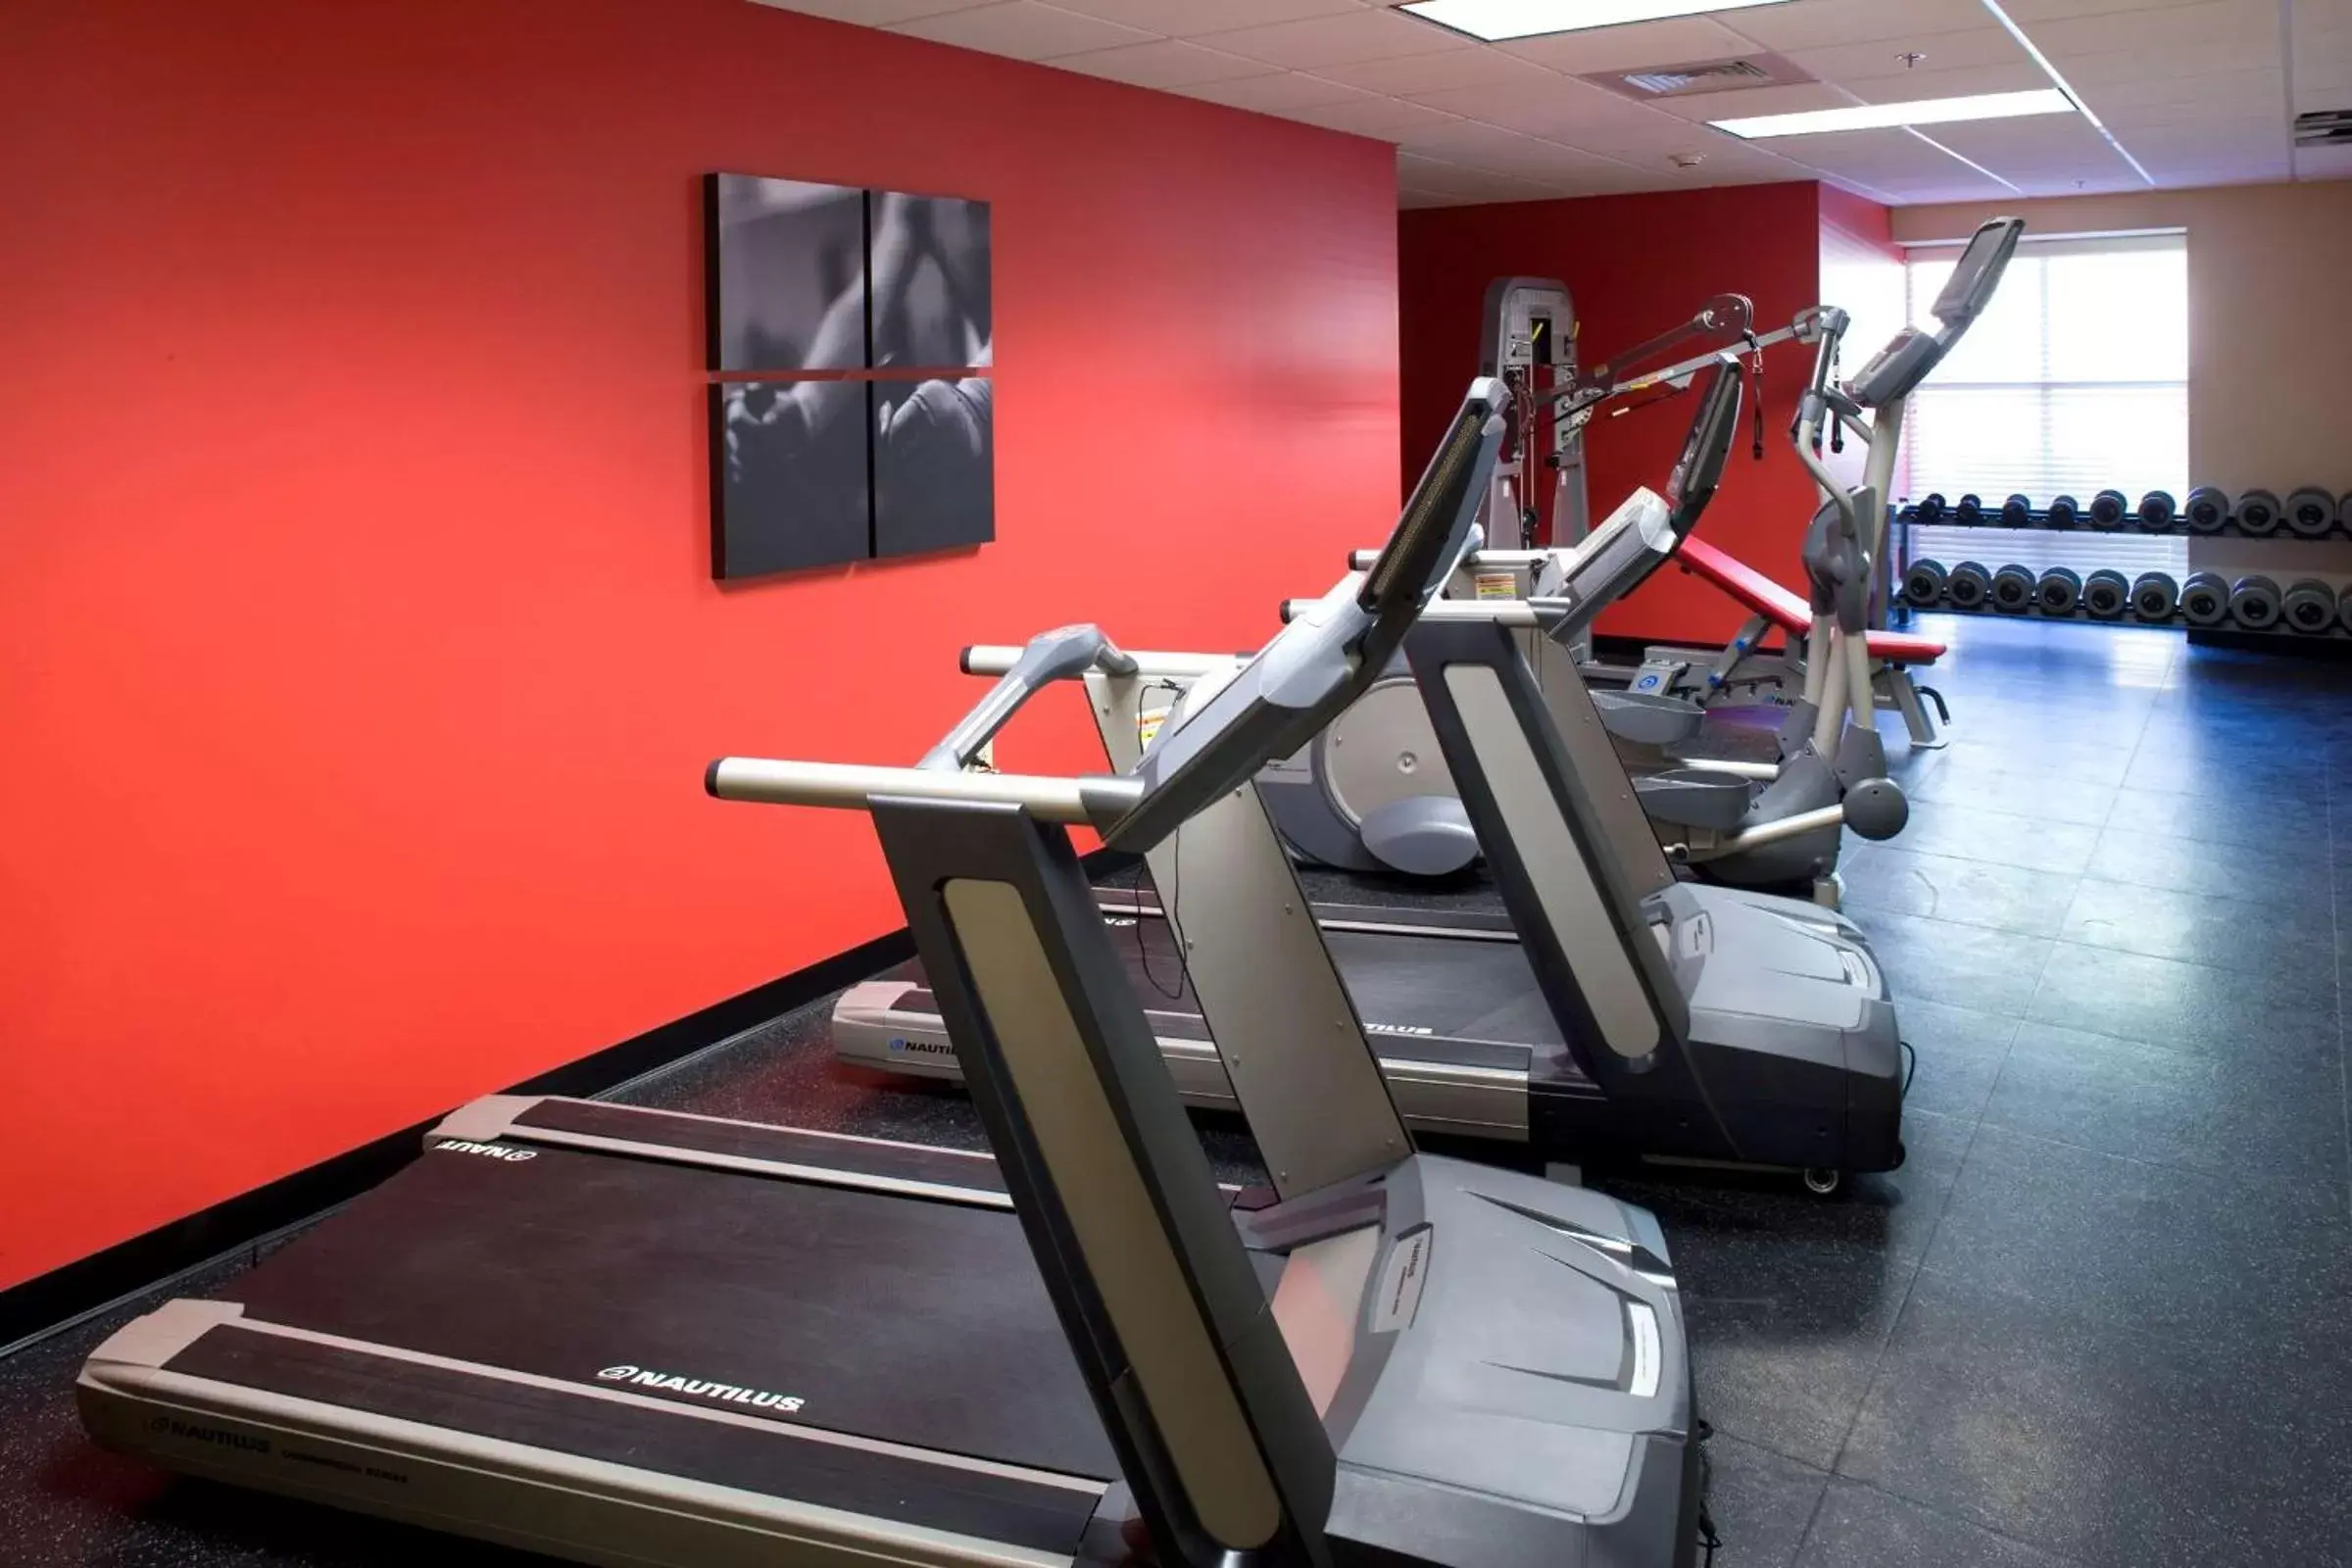 Activities, Fitness Center/Facilities in Country Inn & Suites by Radisson, Knoxville at Cedar Bluff, TN